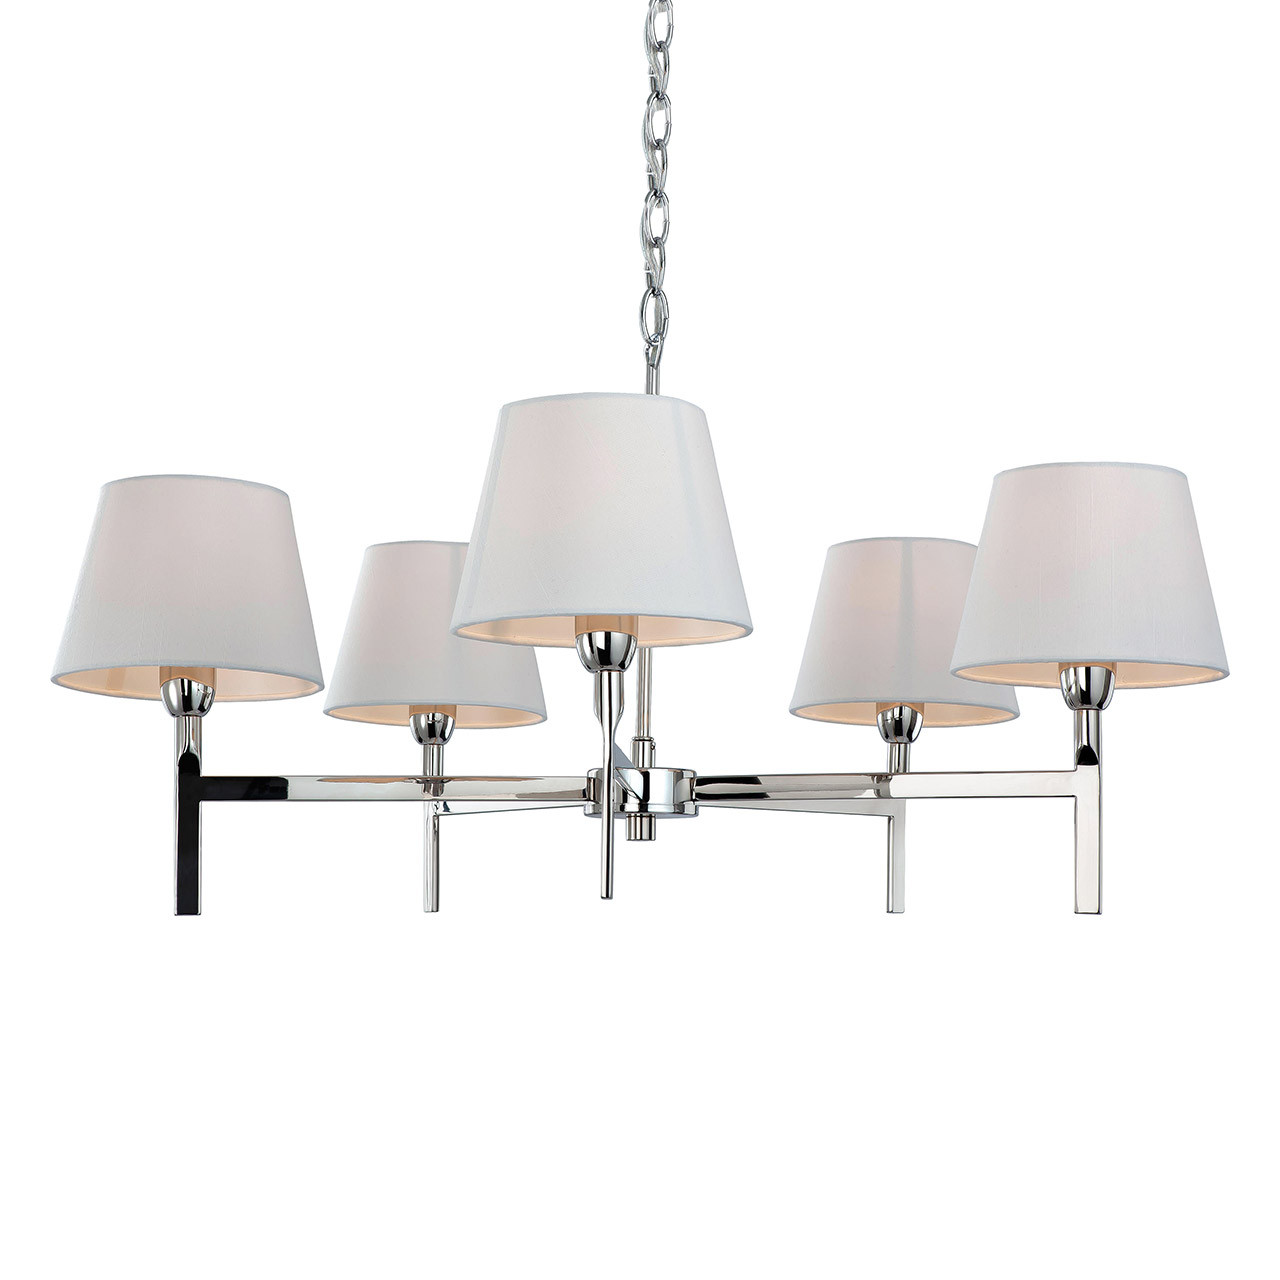 Photos - Chandelier / Lamp FirstLight Transition Contemporary Style 5-Light Pendant Light Polished St 